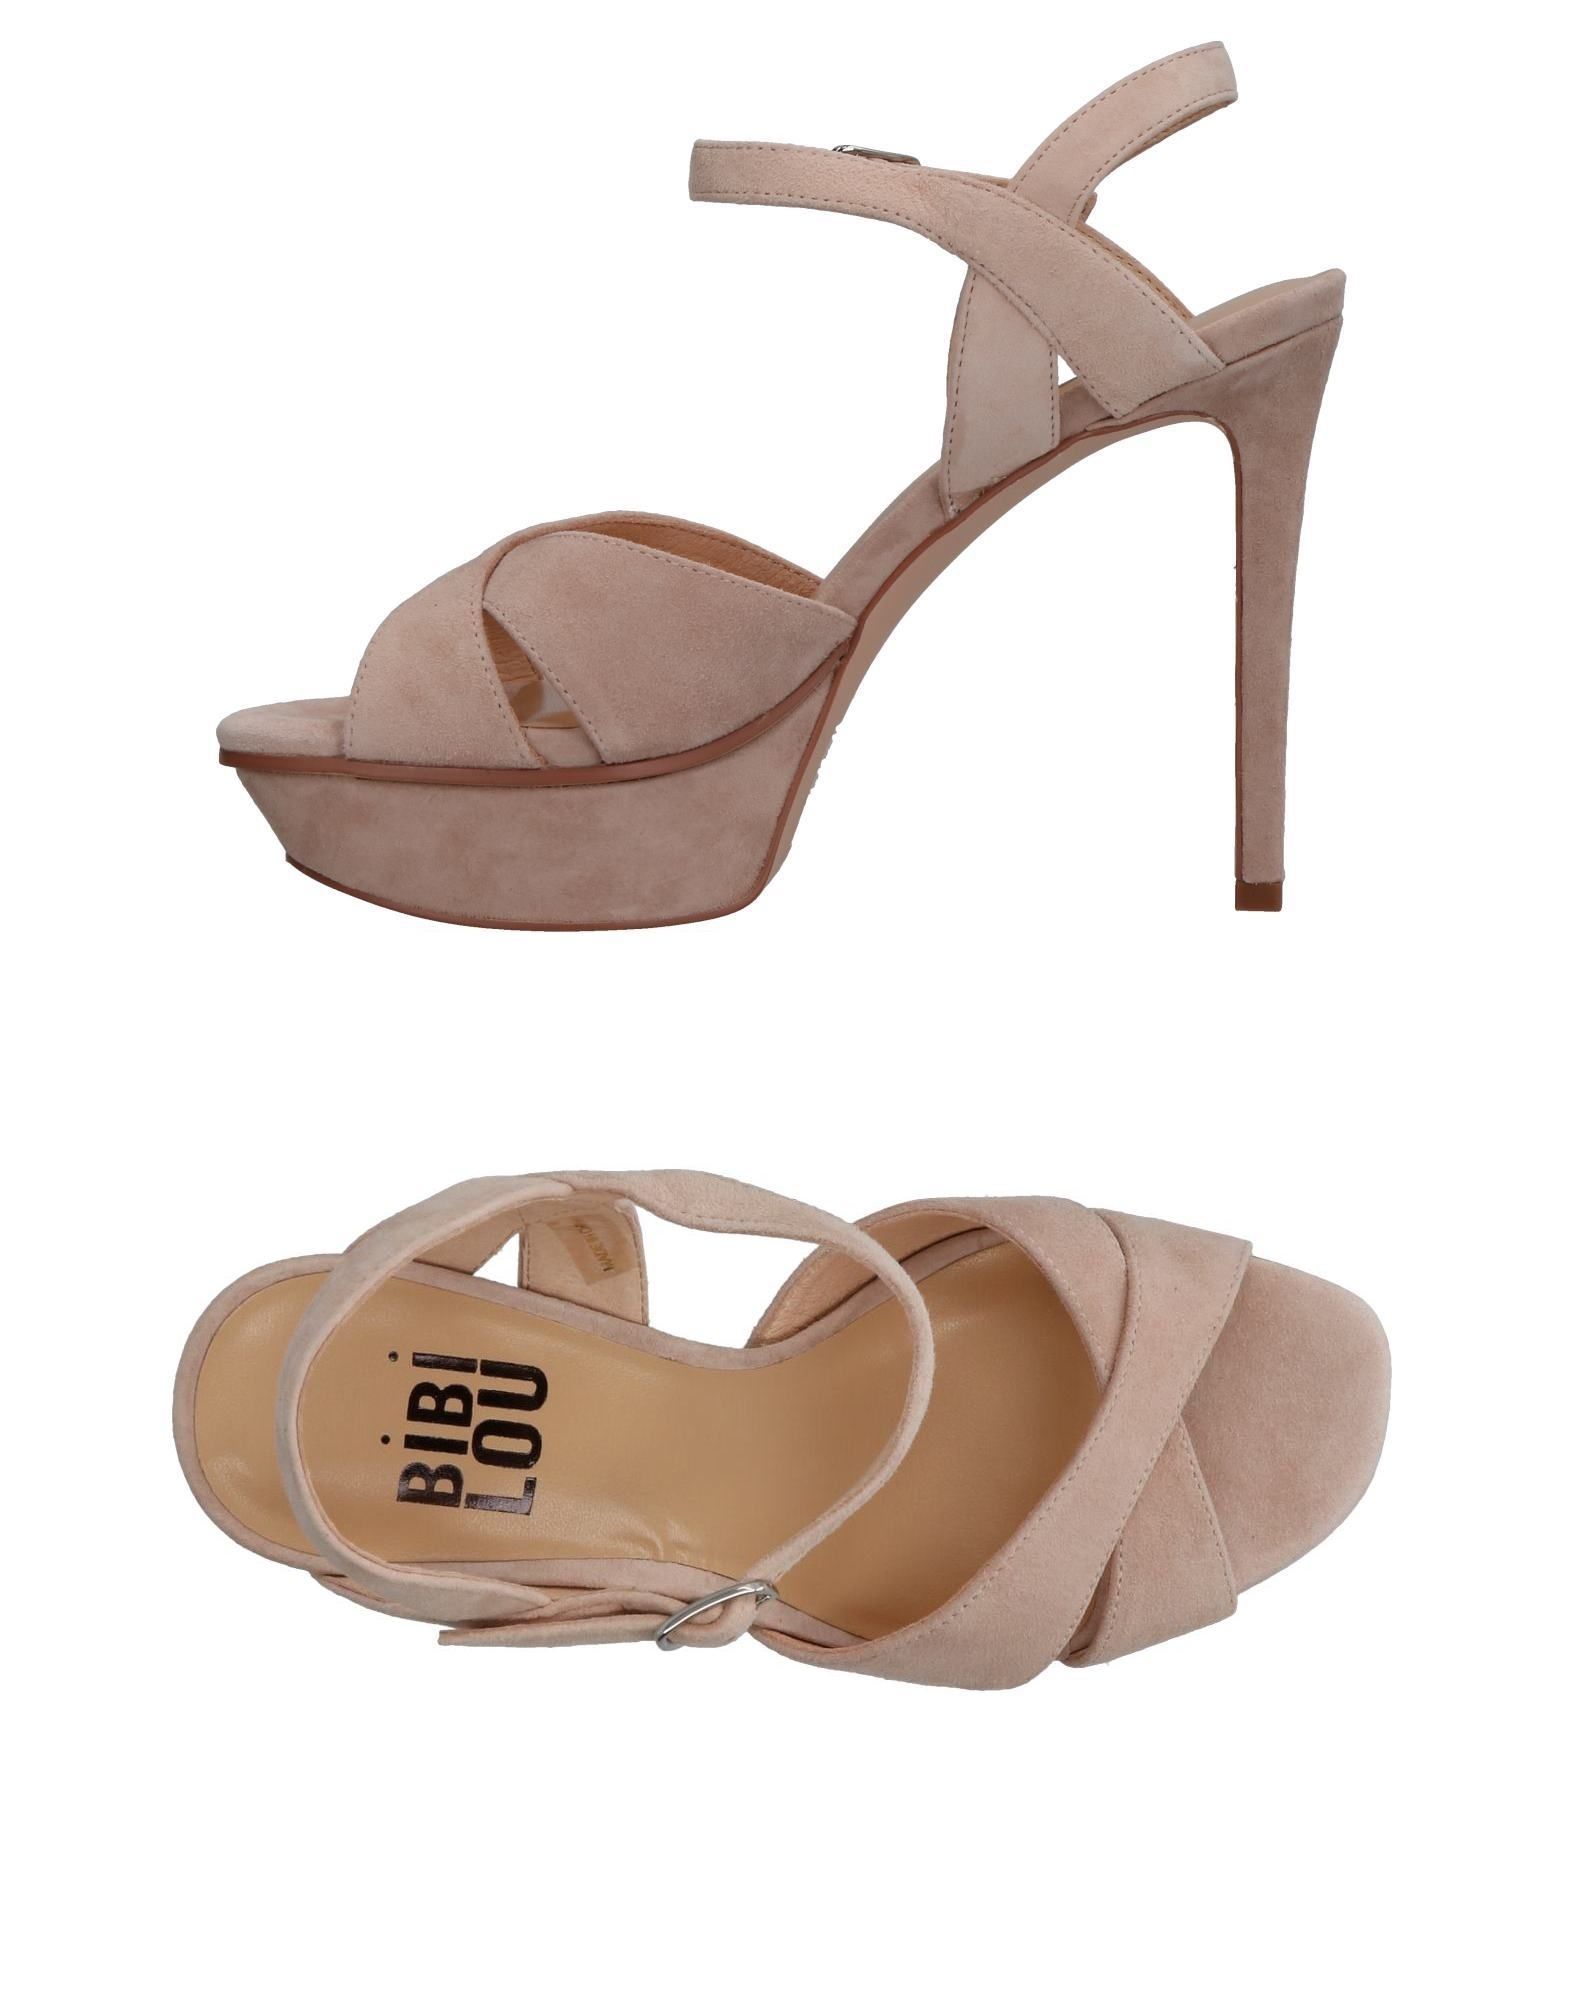 Suede effect<br>No appliqués<br>Solid colour<br>Buckling ankle strap closure<br>Round toeline<br>Stiletto heel<br>Leather lining<br>Sole in eco-leather<br>Contains non-textile parts of animal origin<br>